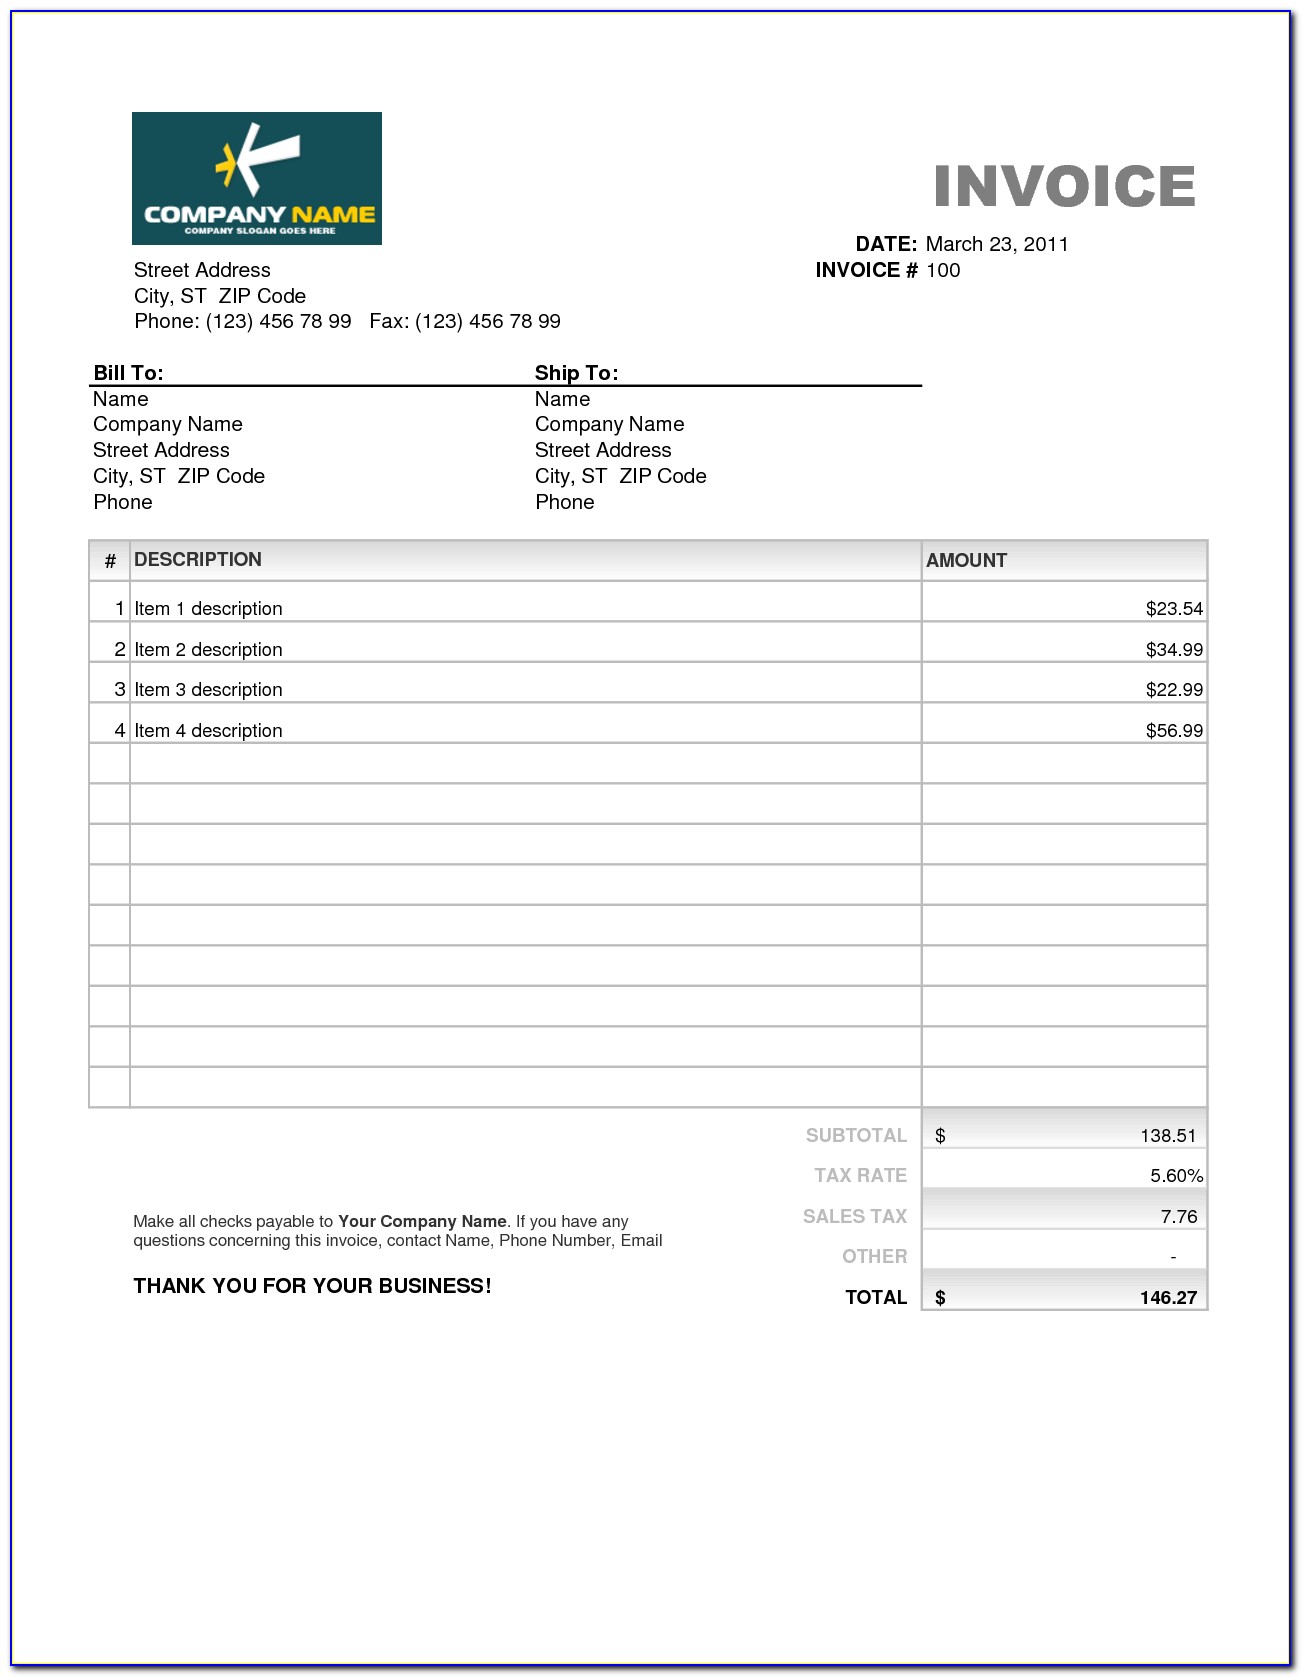 Invoice Payment Wording Examples